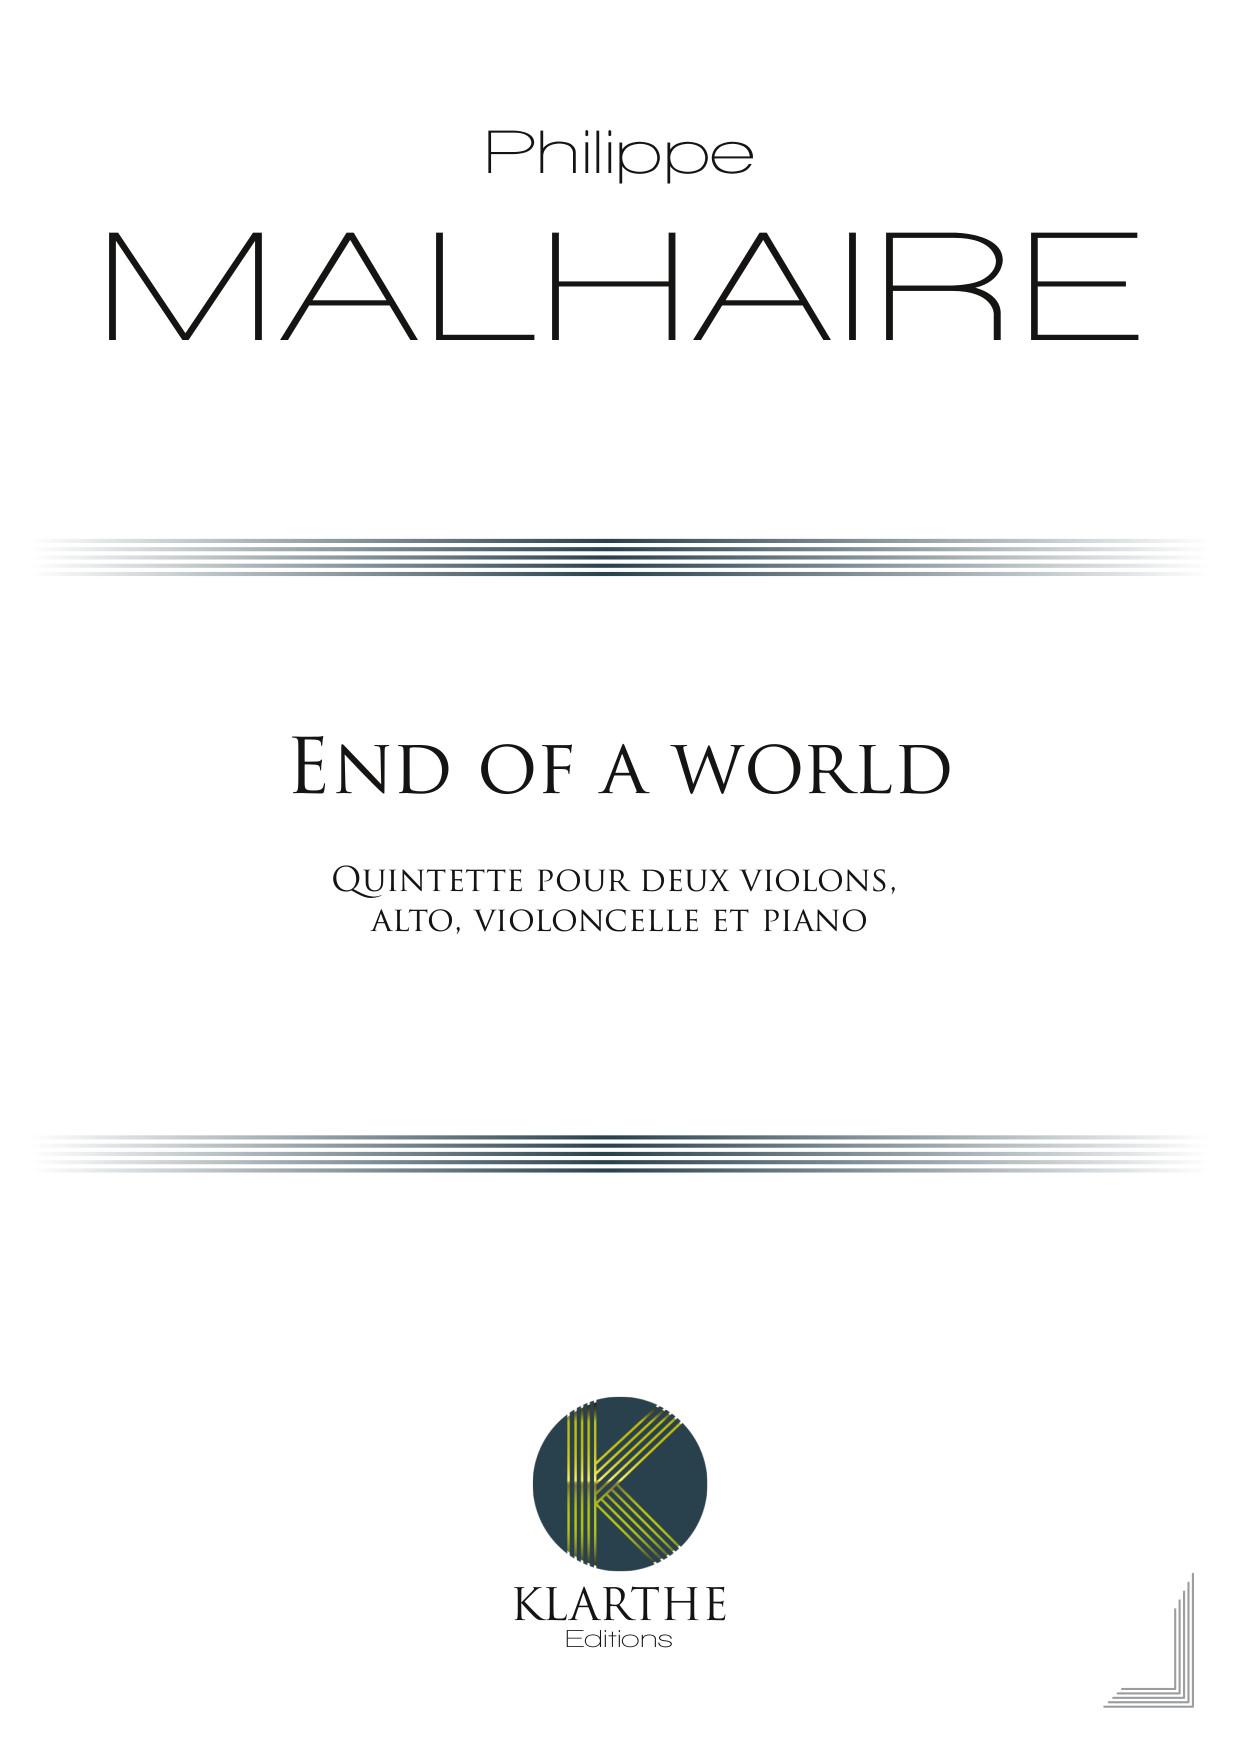 End of a world (MALHAIRE PHILIPPE)